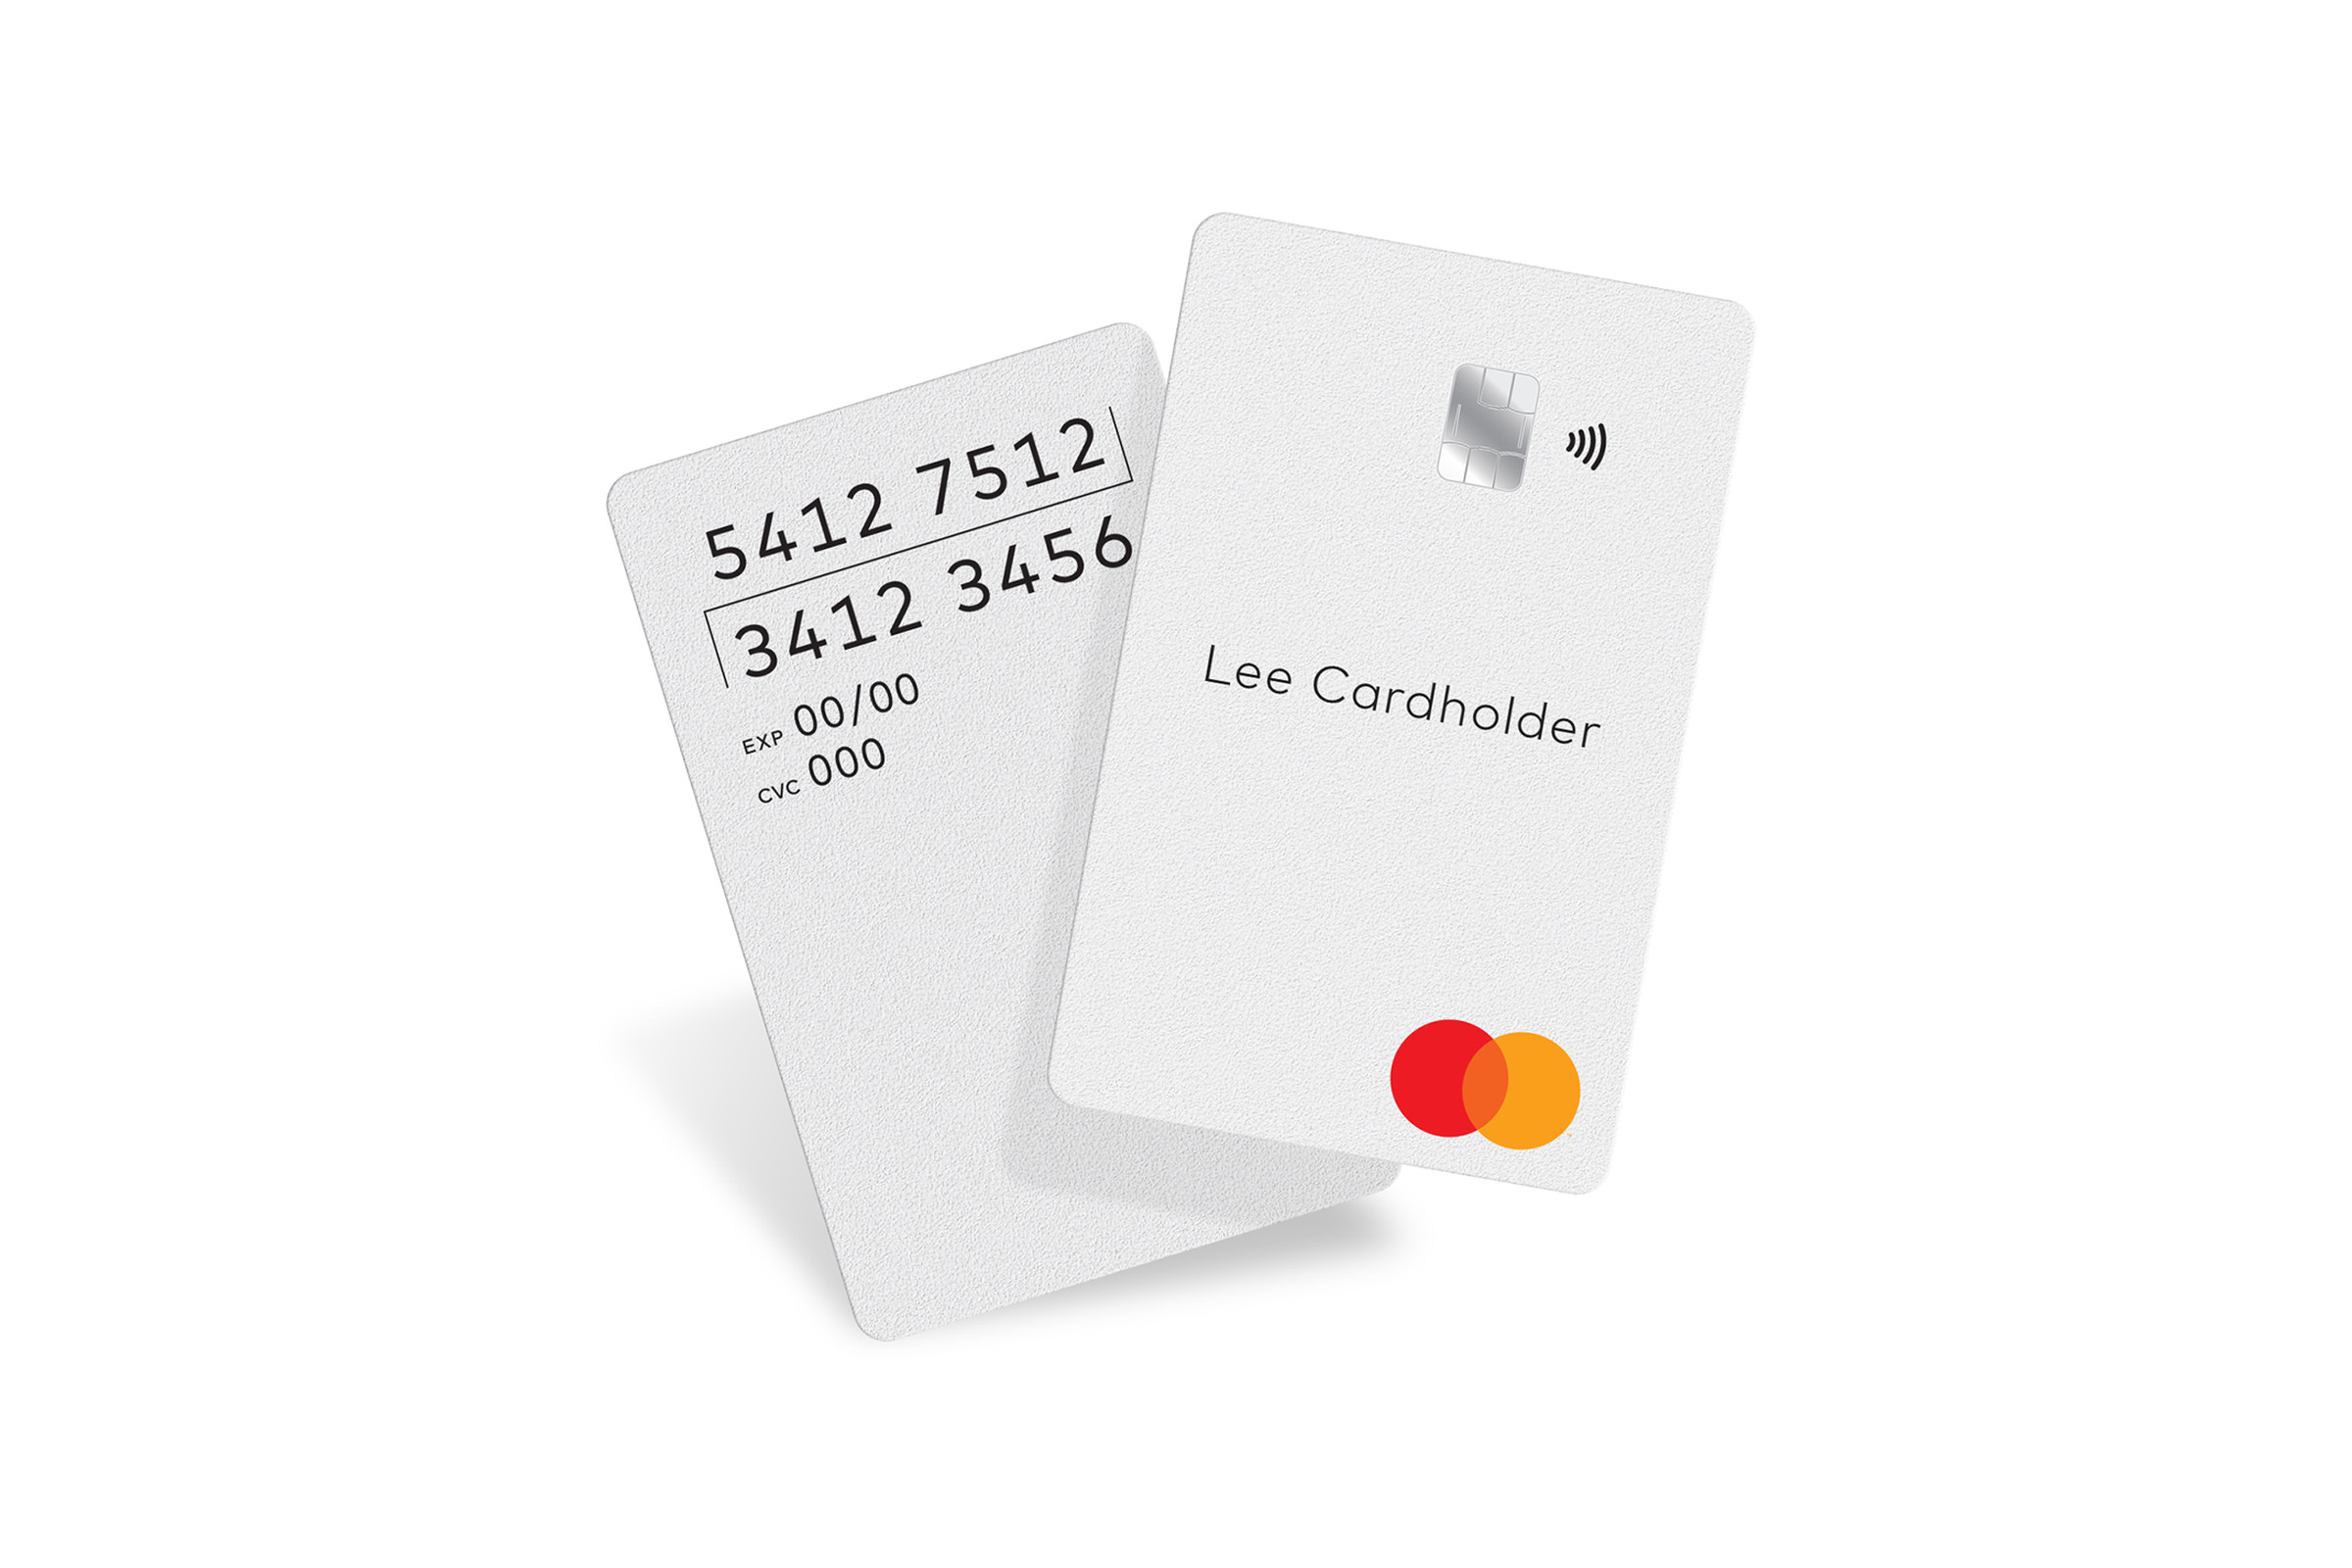 A card with an EMV chip and contactless, but not magnetic stripe.